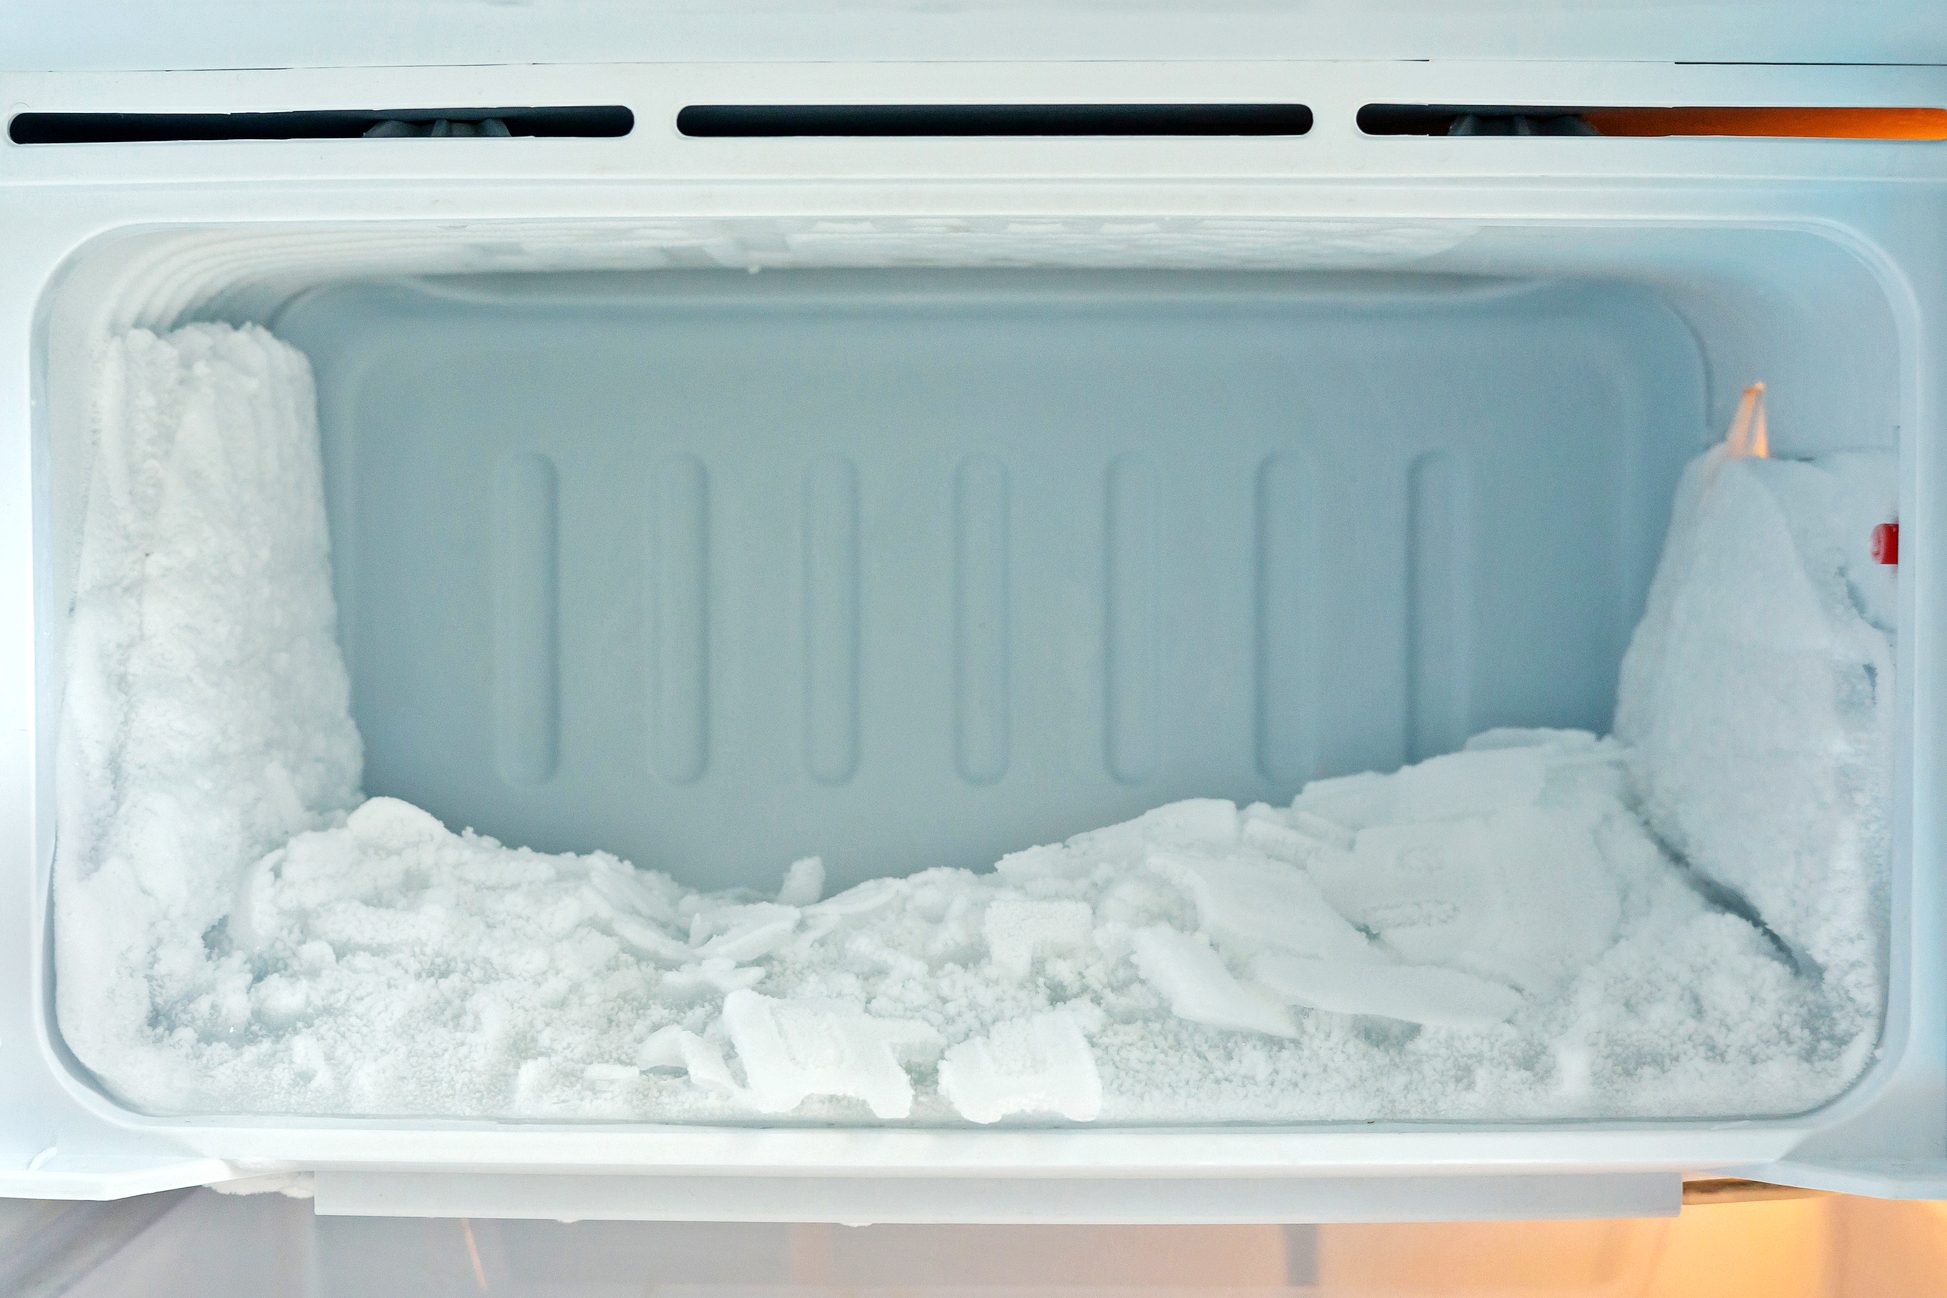 How To Remove Ice From Freezer